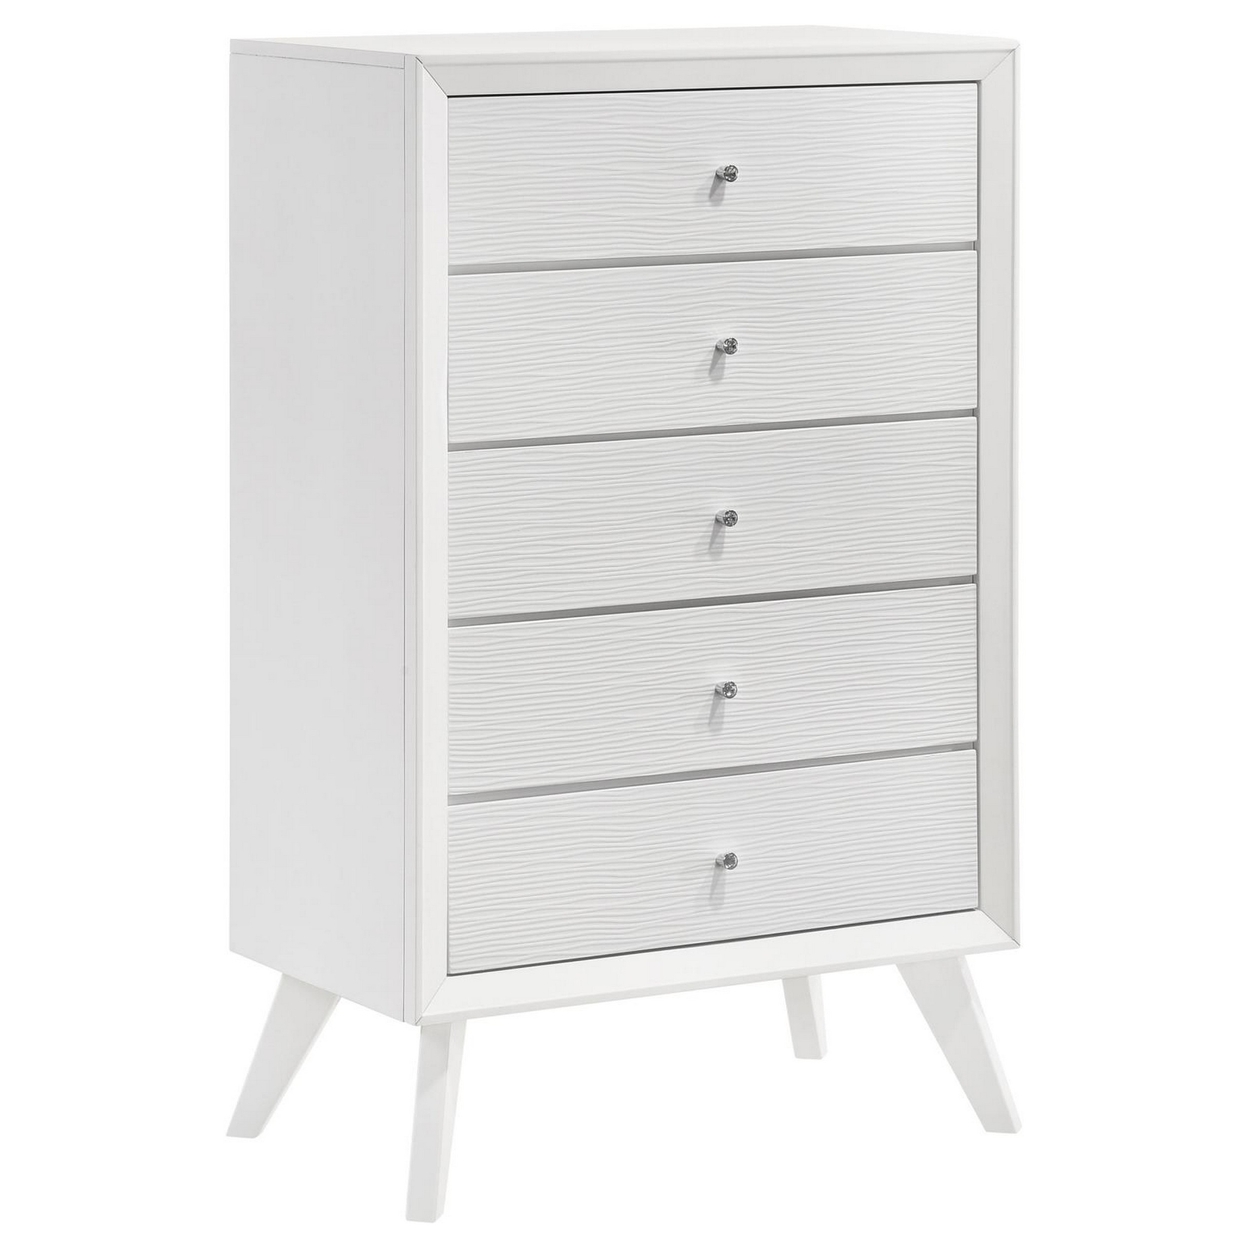 Zoe 48 Inch Tall Chest, 5 Drawers With Crystal Knobs, Wavy Design, White- Saltoro Sherpi